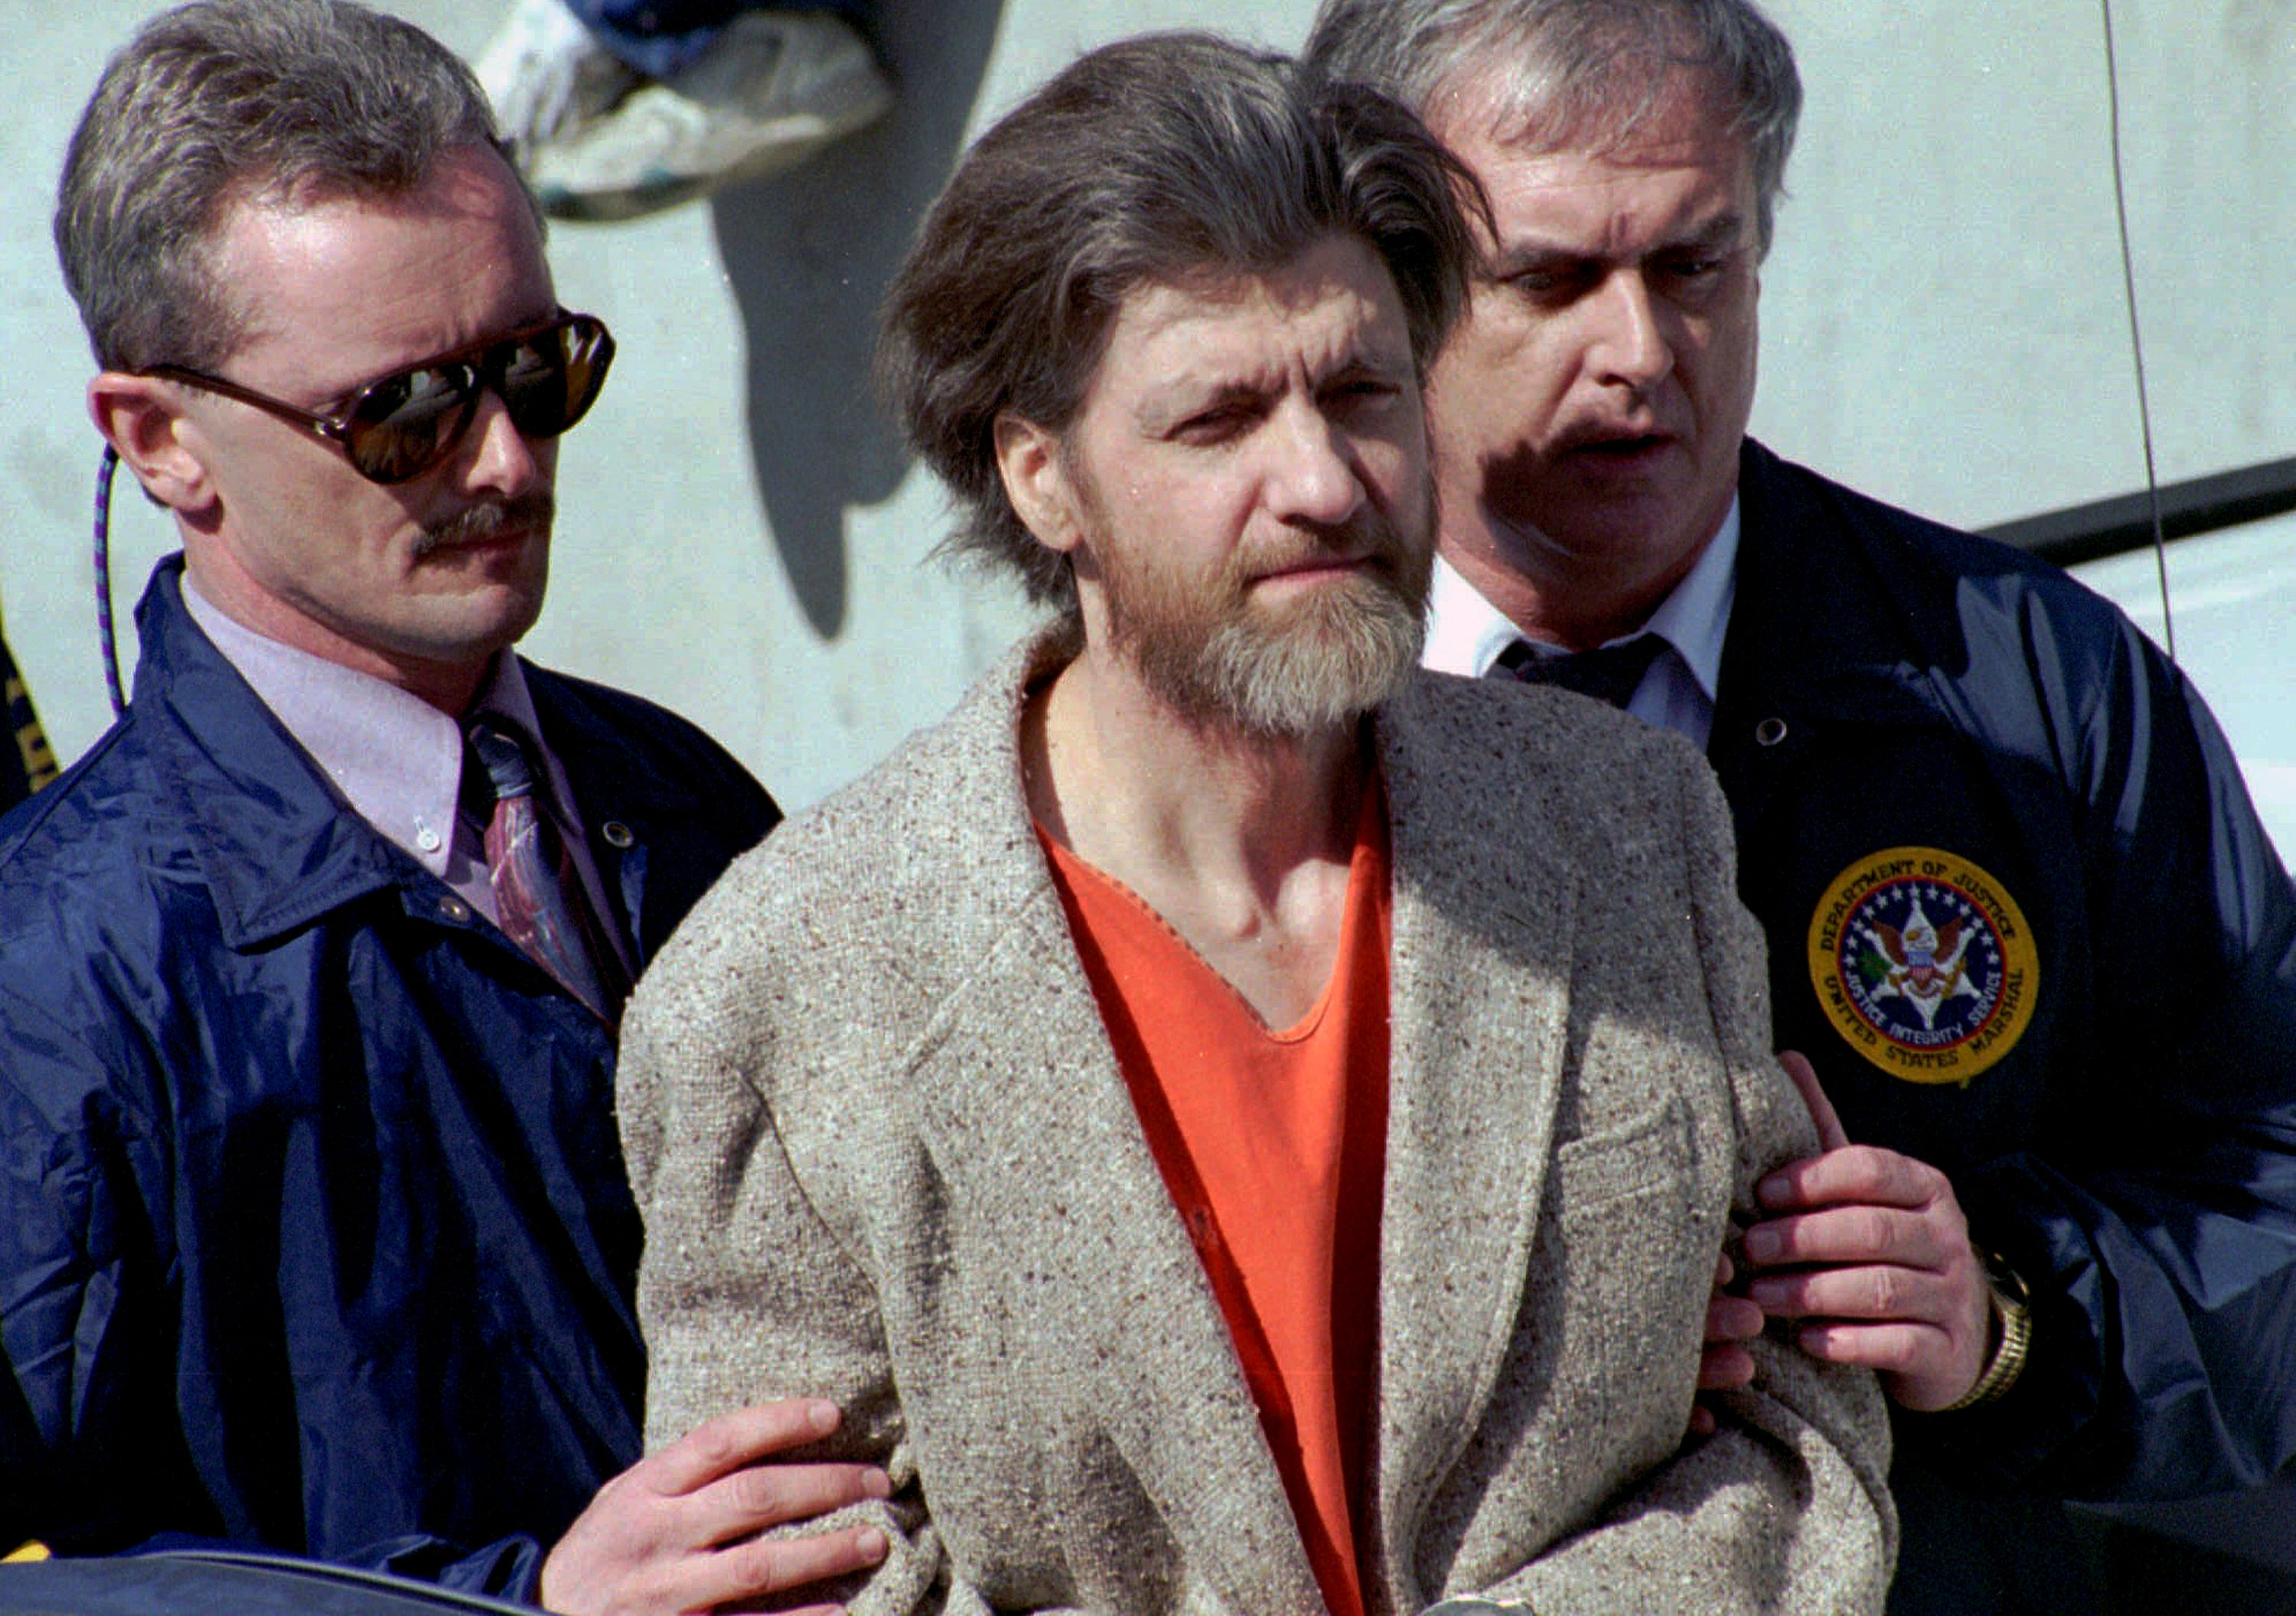 A new autopsy report detailing the death of ‘the Unabomber’ Ted Kaczynski found his was suffering from rectal cancer and depression before his death